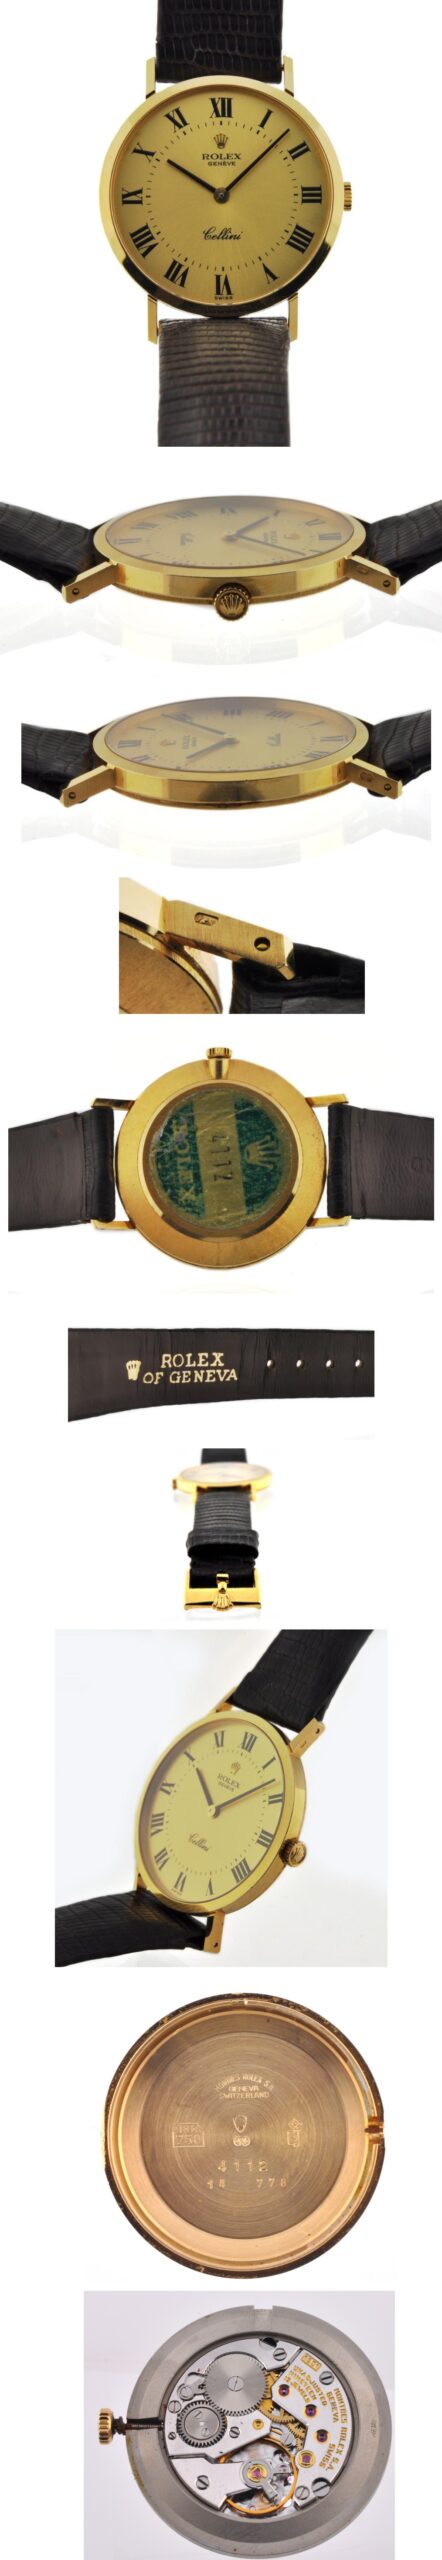 1980s Rolex Geneve Cellini 18k gold watch with original Roman-numeral dial, case, winding crown, buckle, and clean manual winding movement.